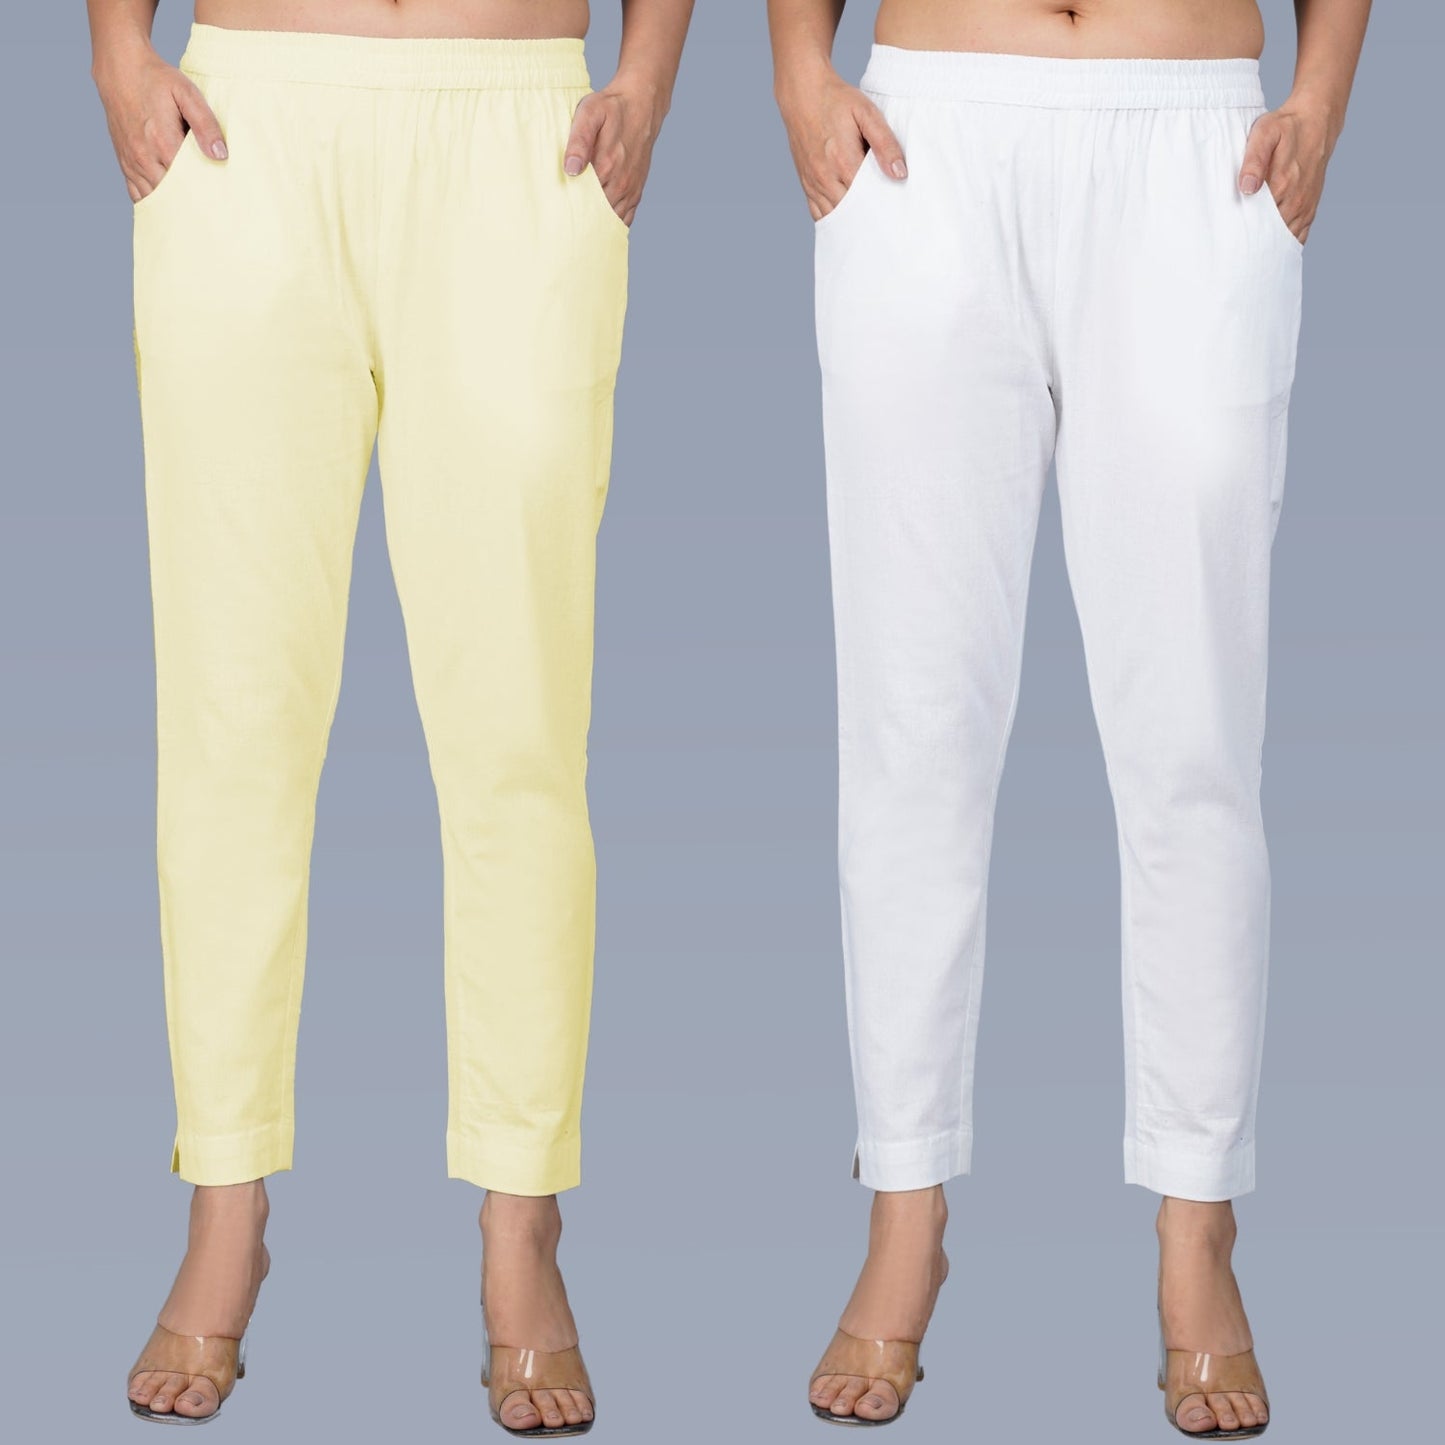 Pack Of 2 Womens Regular Fit Cream And White Fully Elastic Waistband Cotton Trouser